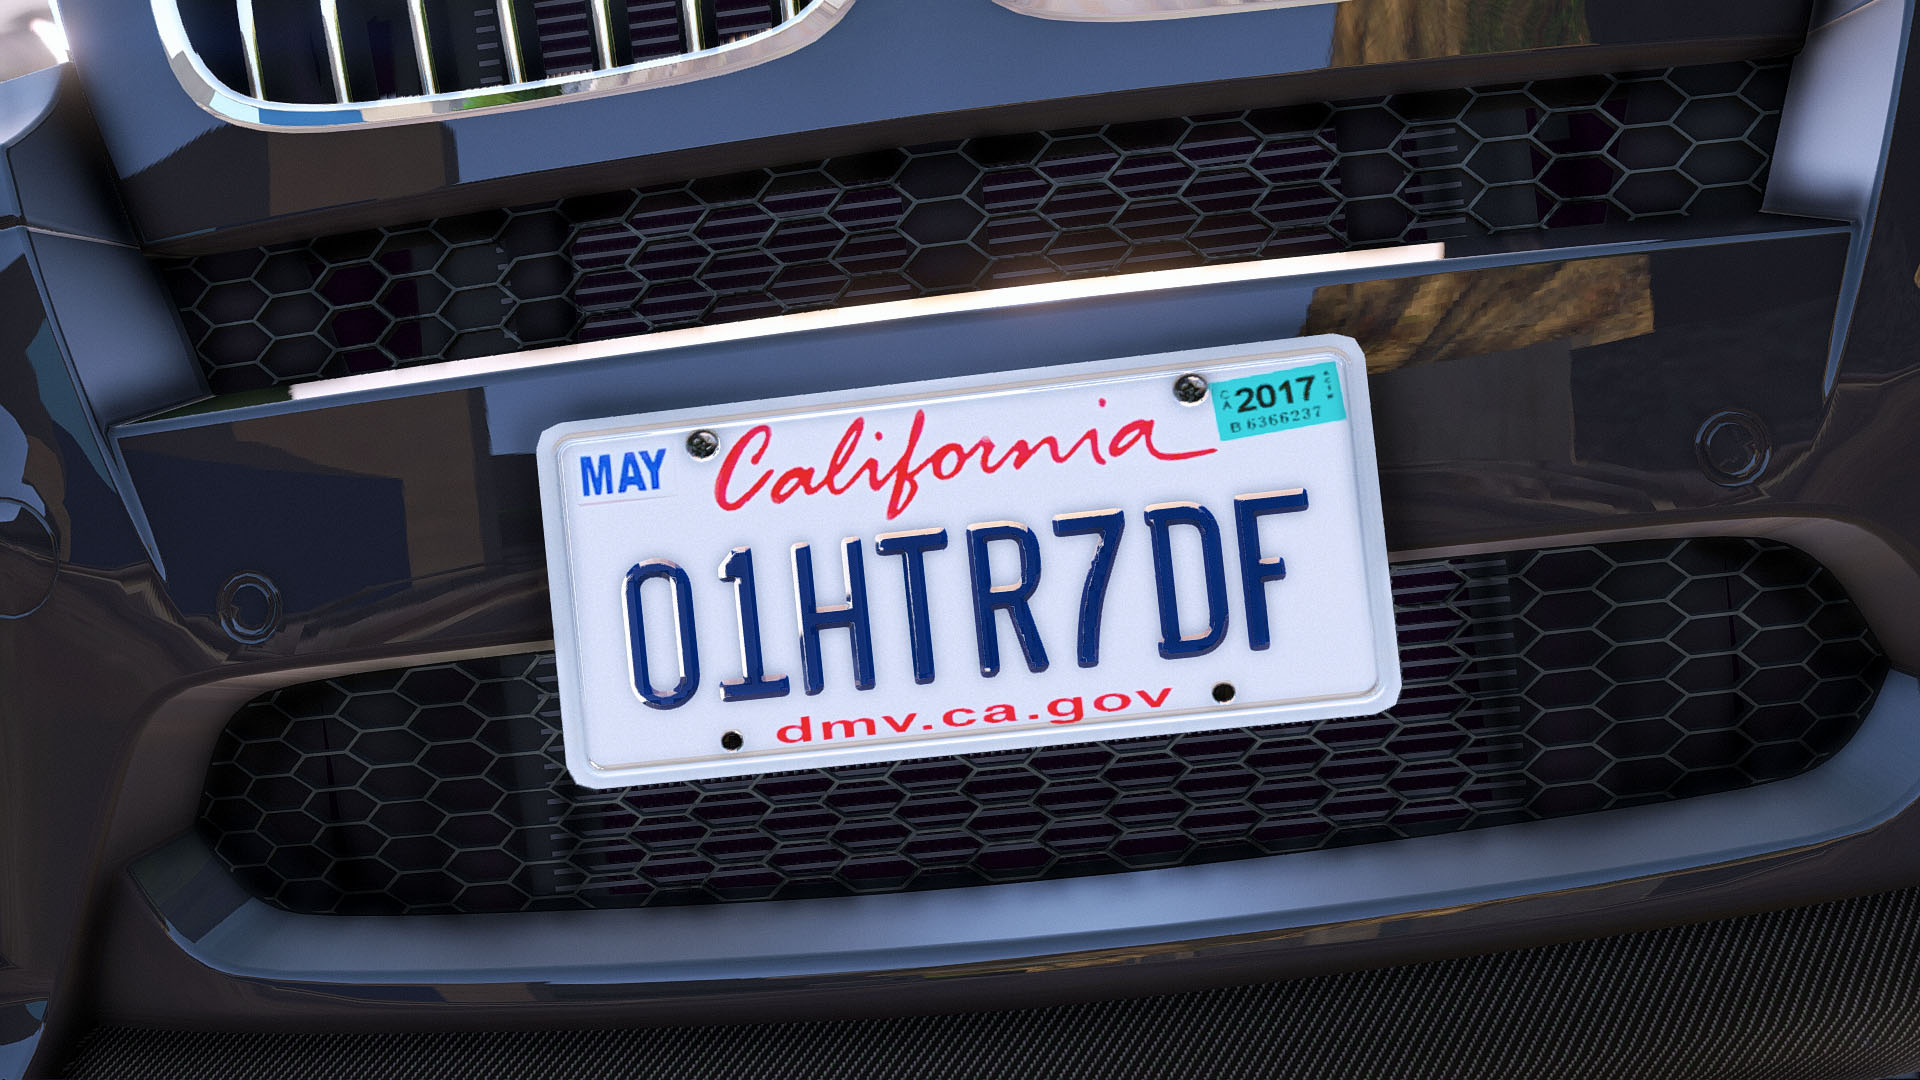 California License Plate Font Type